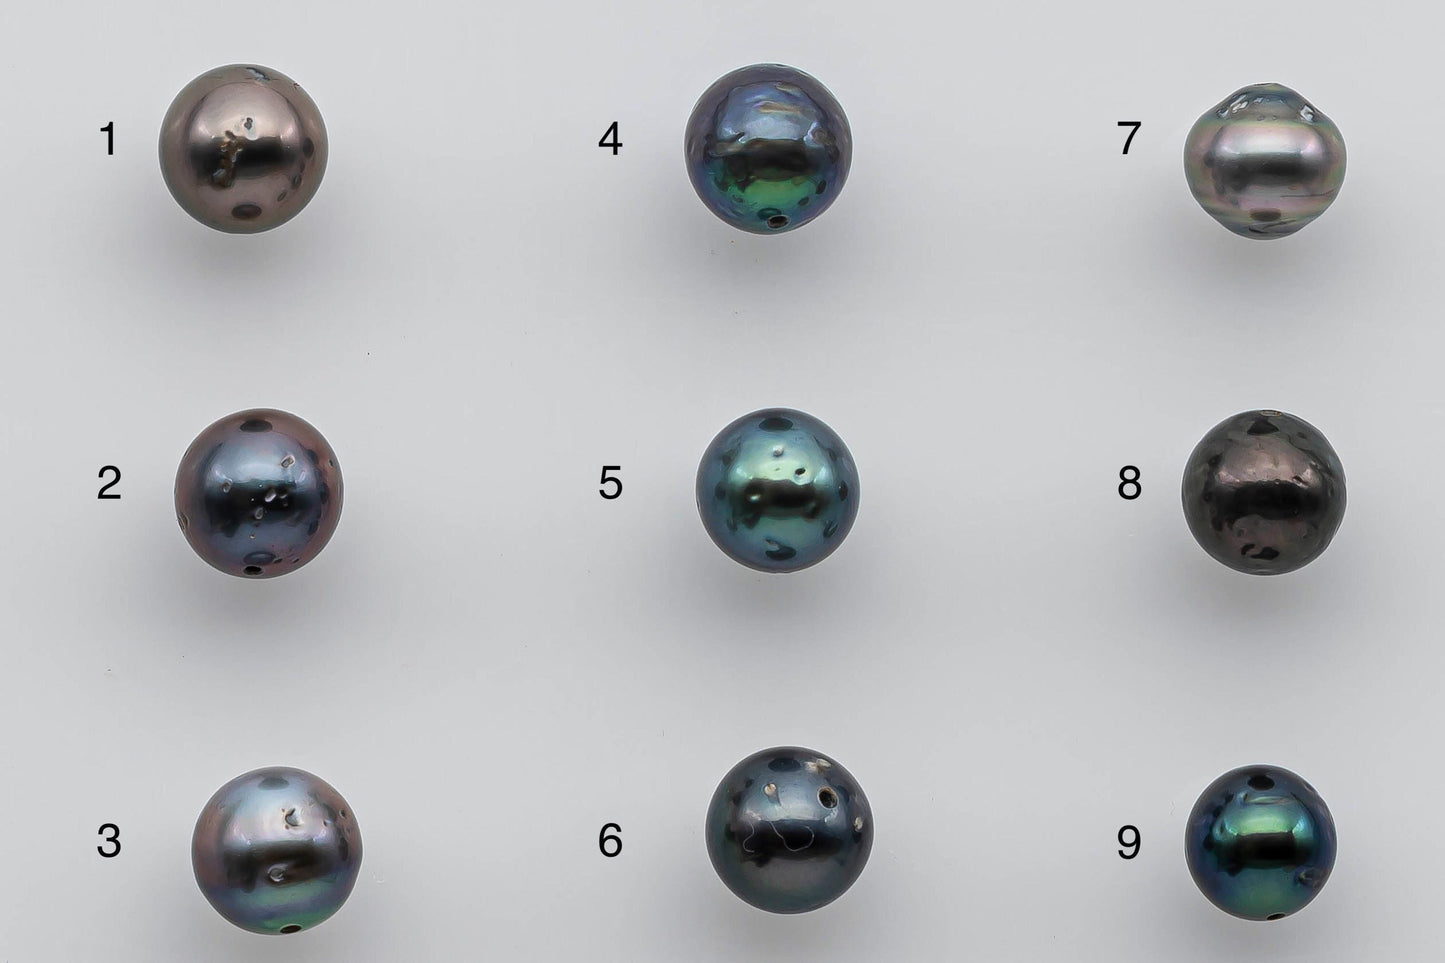 7-8mm Tahitian Pearl Loose Round with High Luster and Natural Colors with Blemishes in Single Piece Predrilled Hole, SKU # 1373TH